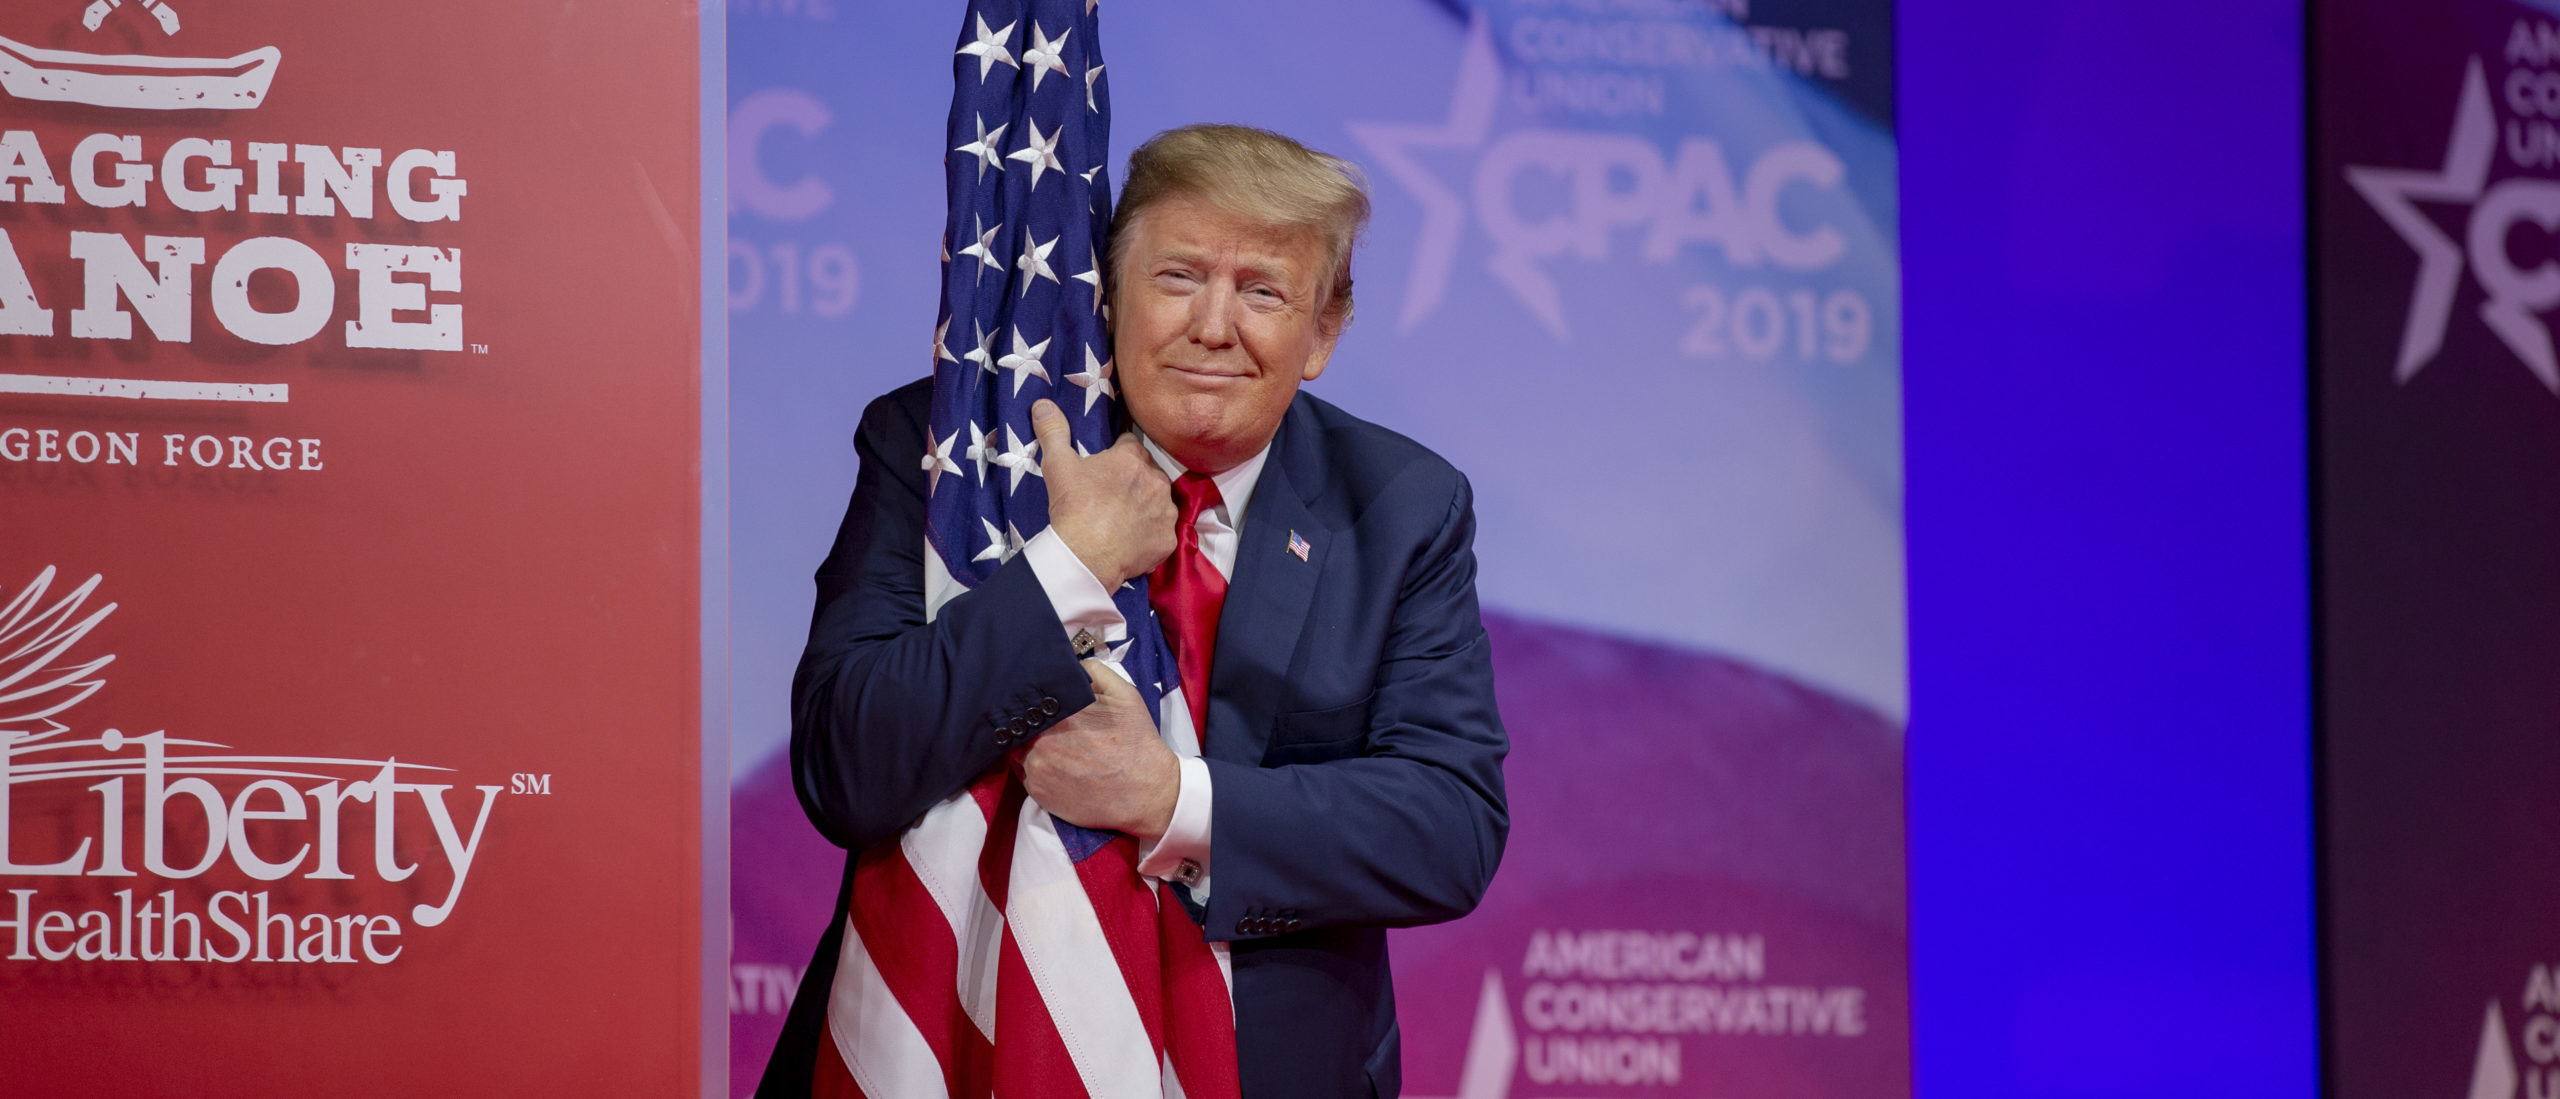 U.S. President Donald Trump hugs the U.S. flag during CPAC 2019 on March 02, 2019 in National Harbor, Maryland. (Photo by Tasos Katopodis/Getty Images)